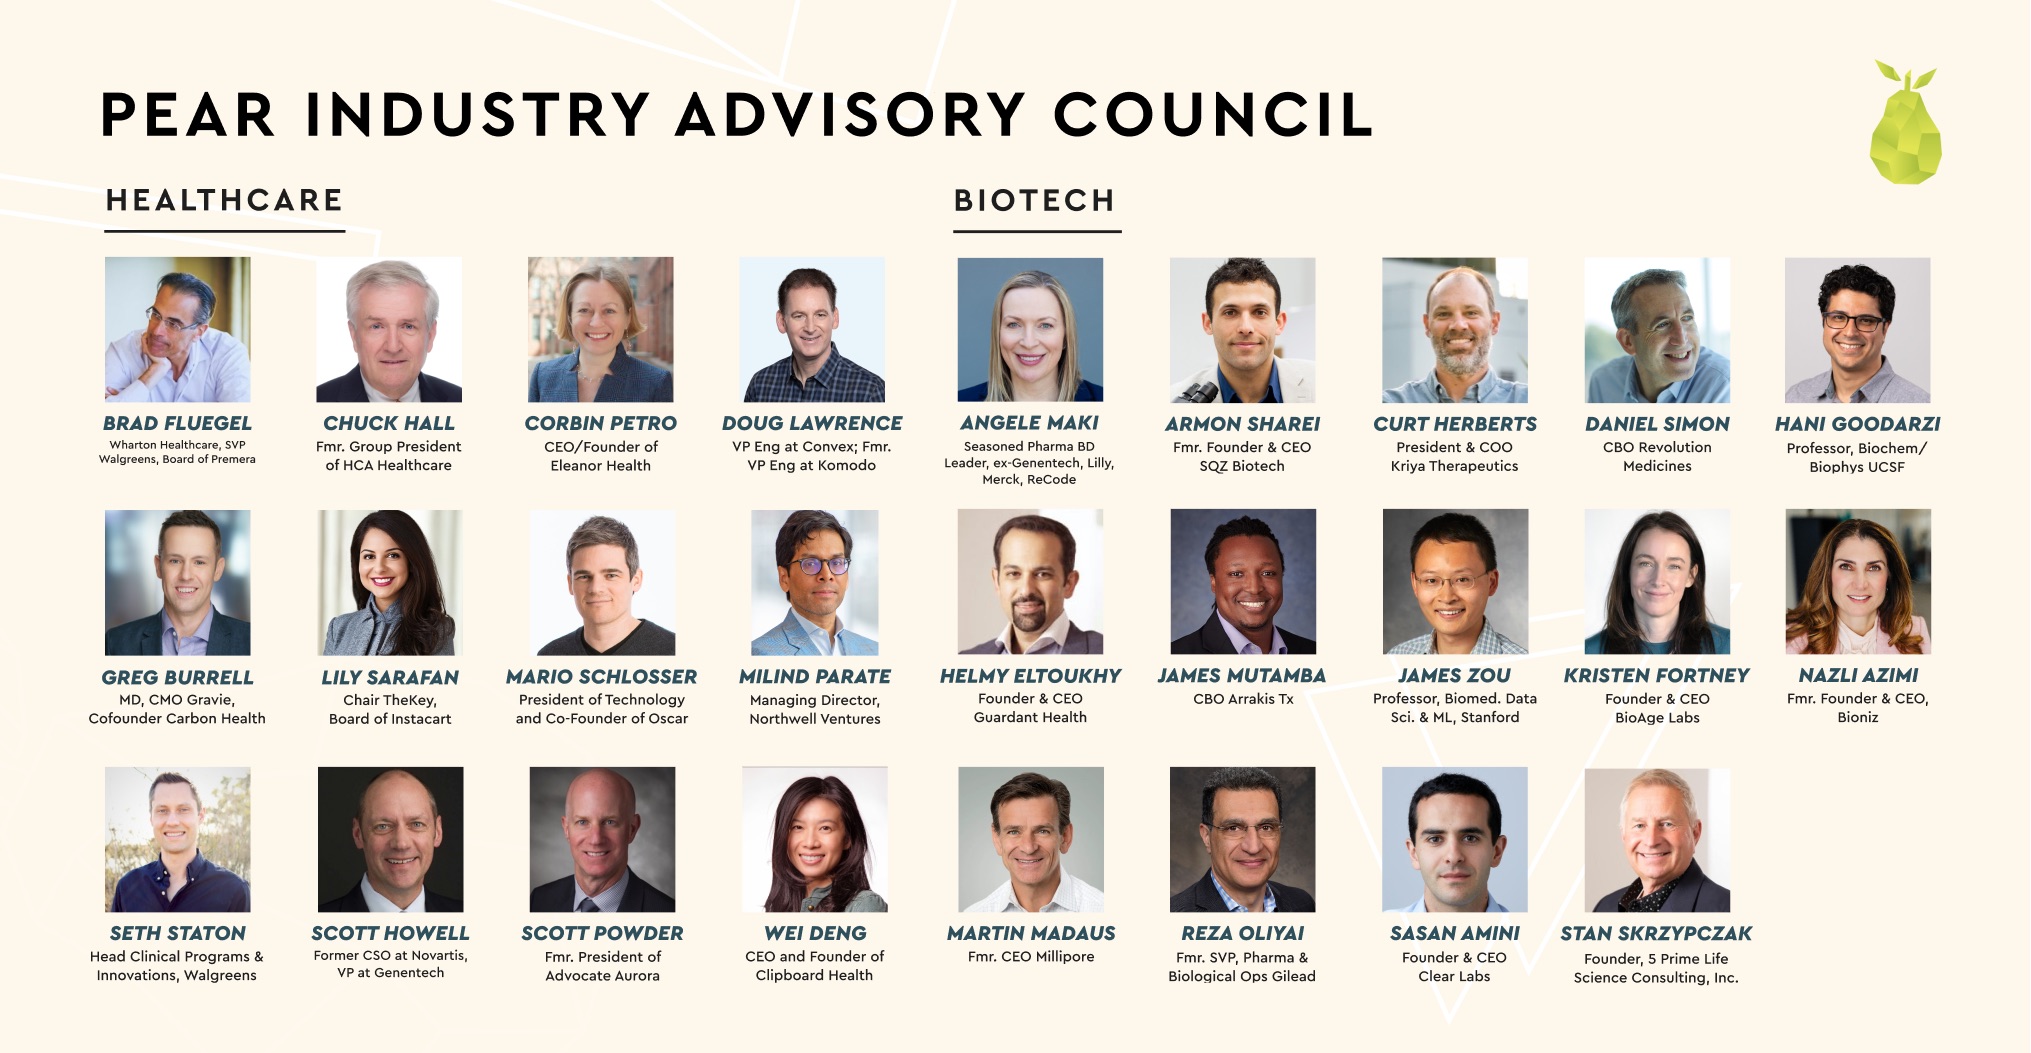 Introducing Pear’s Healthcare and Biotech Industry Advisory Councils!